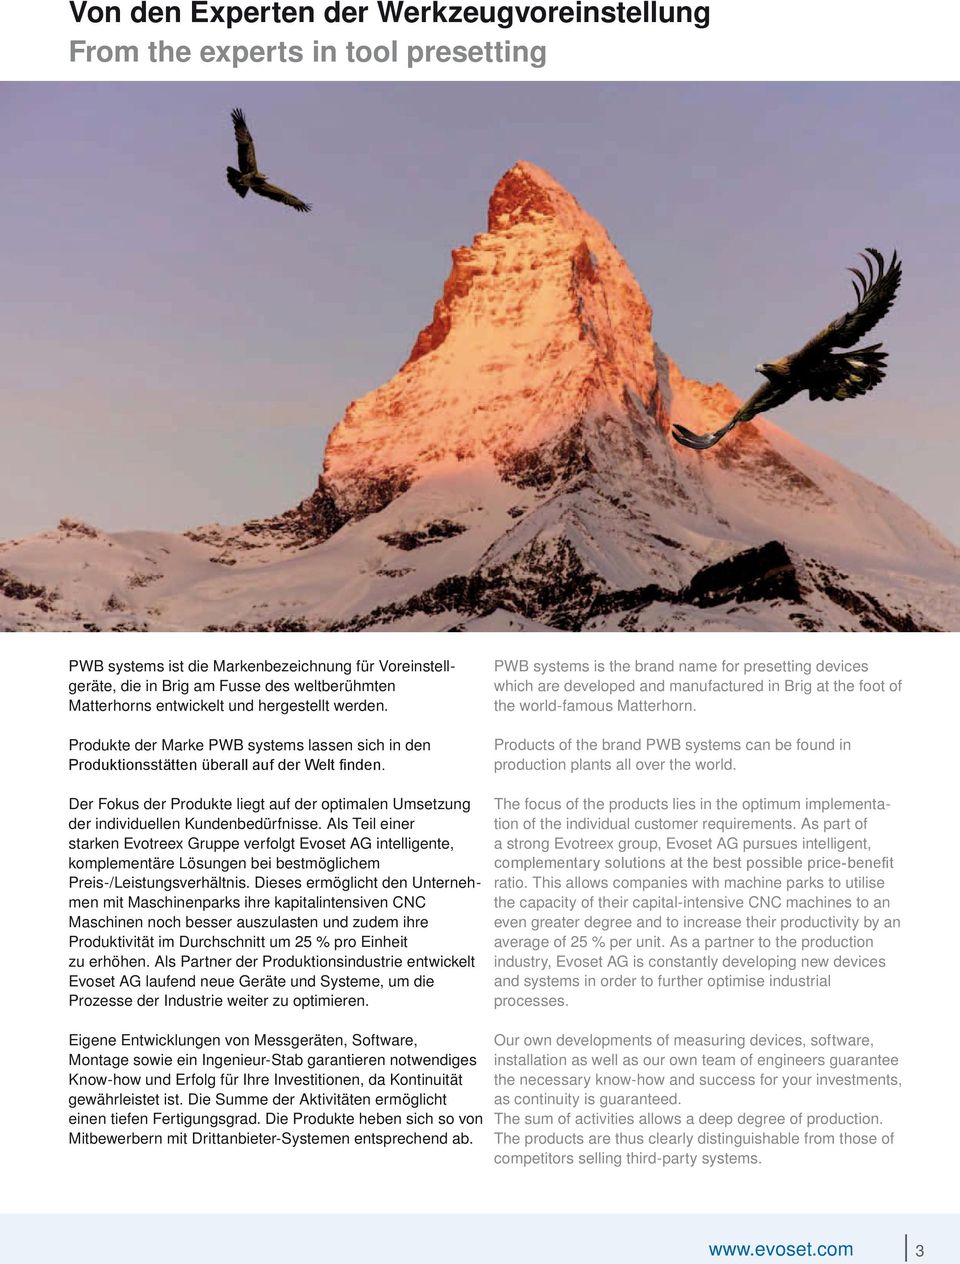 PWB systems is the brand name for presetting devices which are developed and manufactured in Brig at the foot of the world-famous Matterhorn.